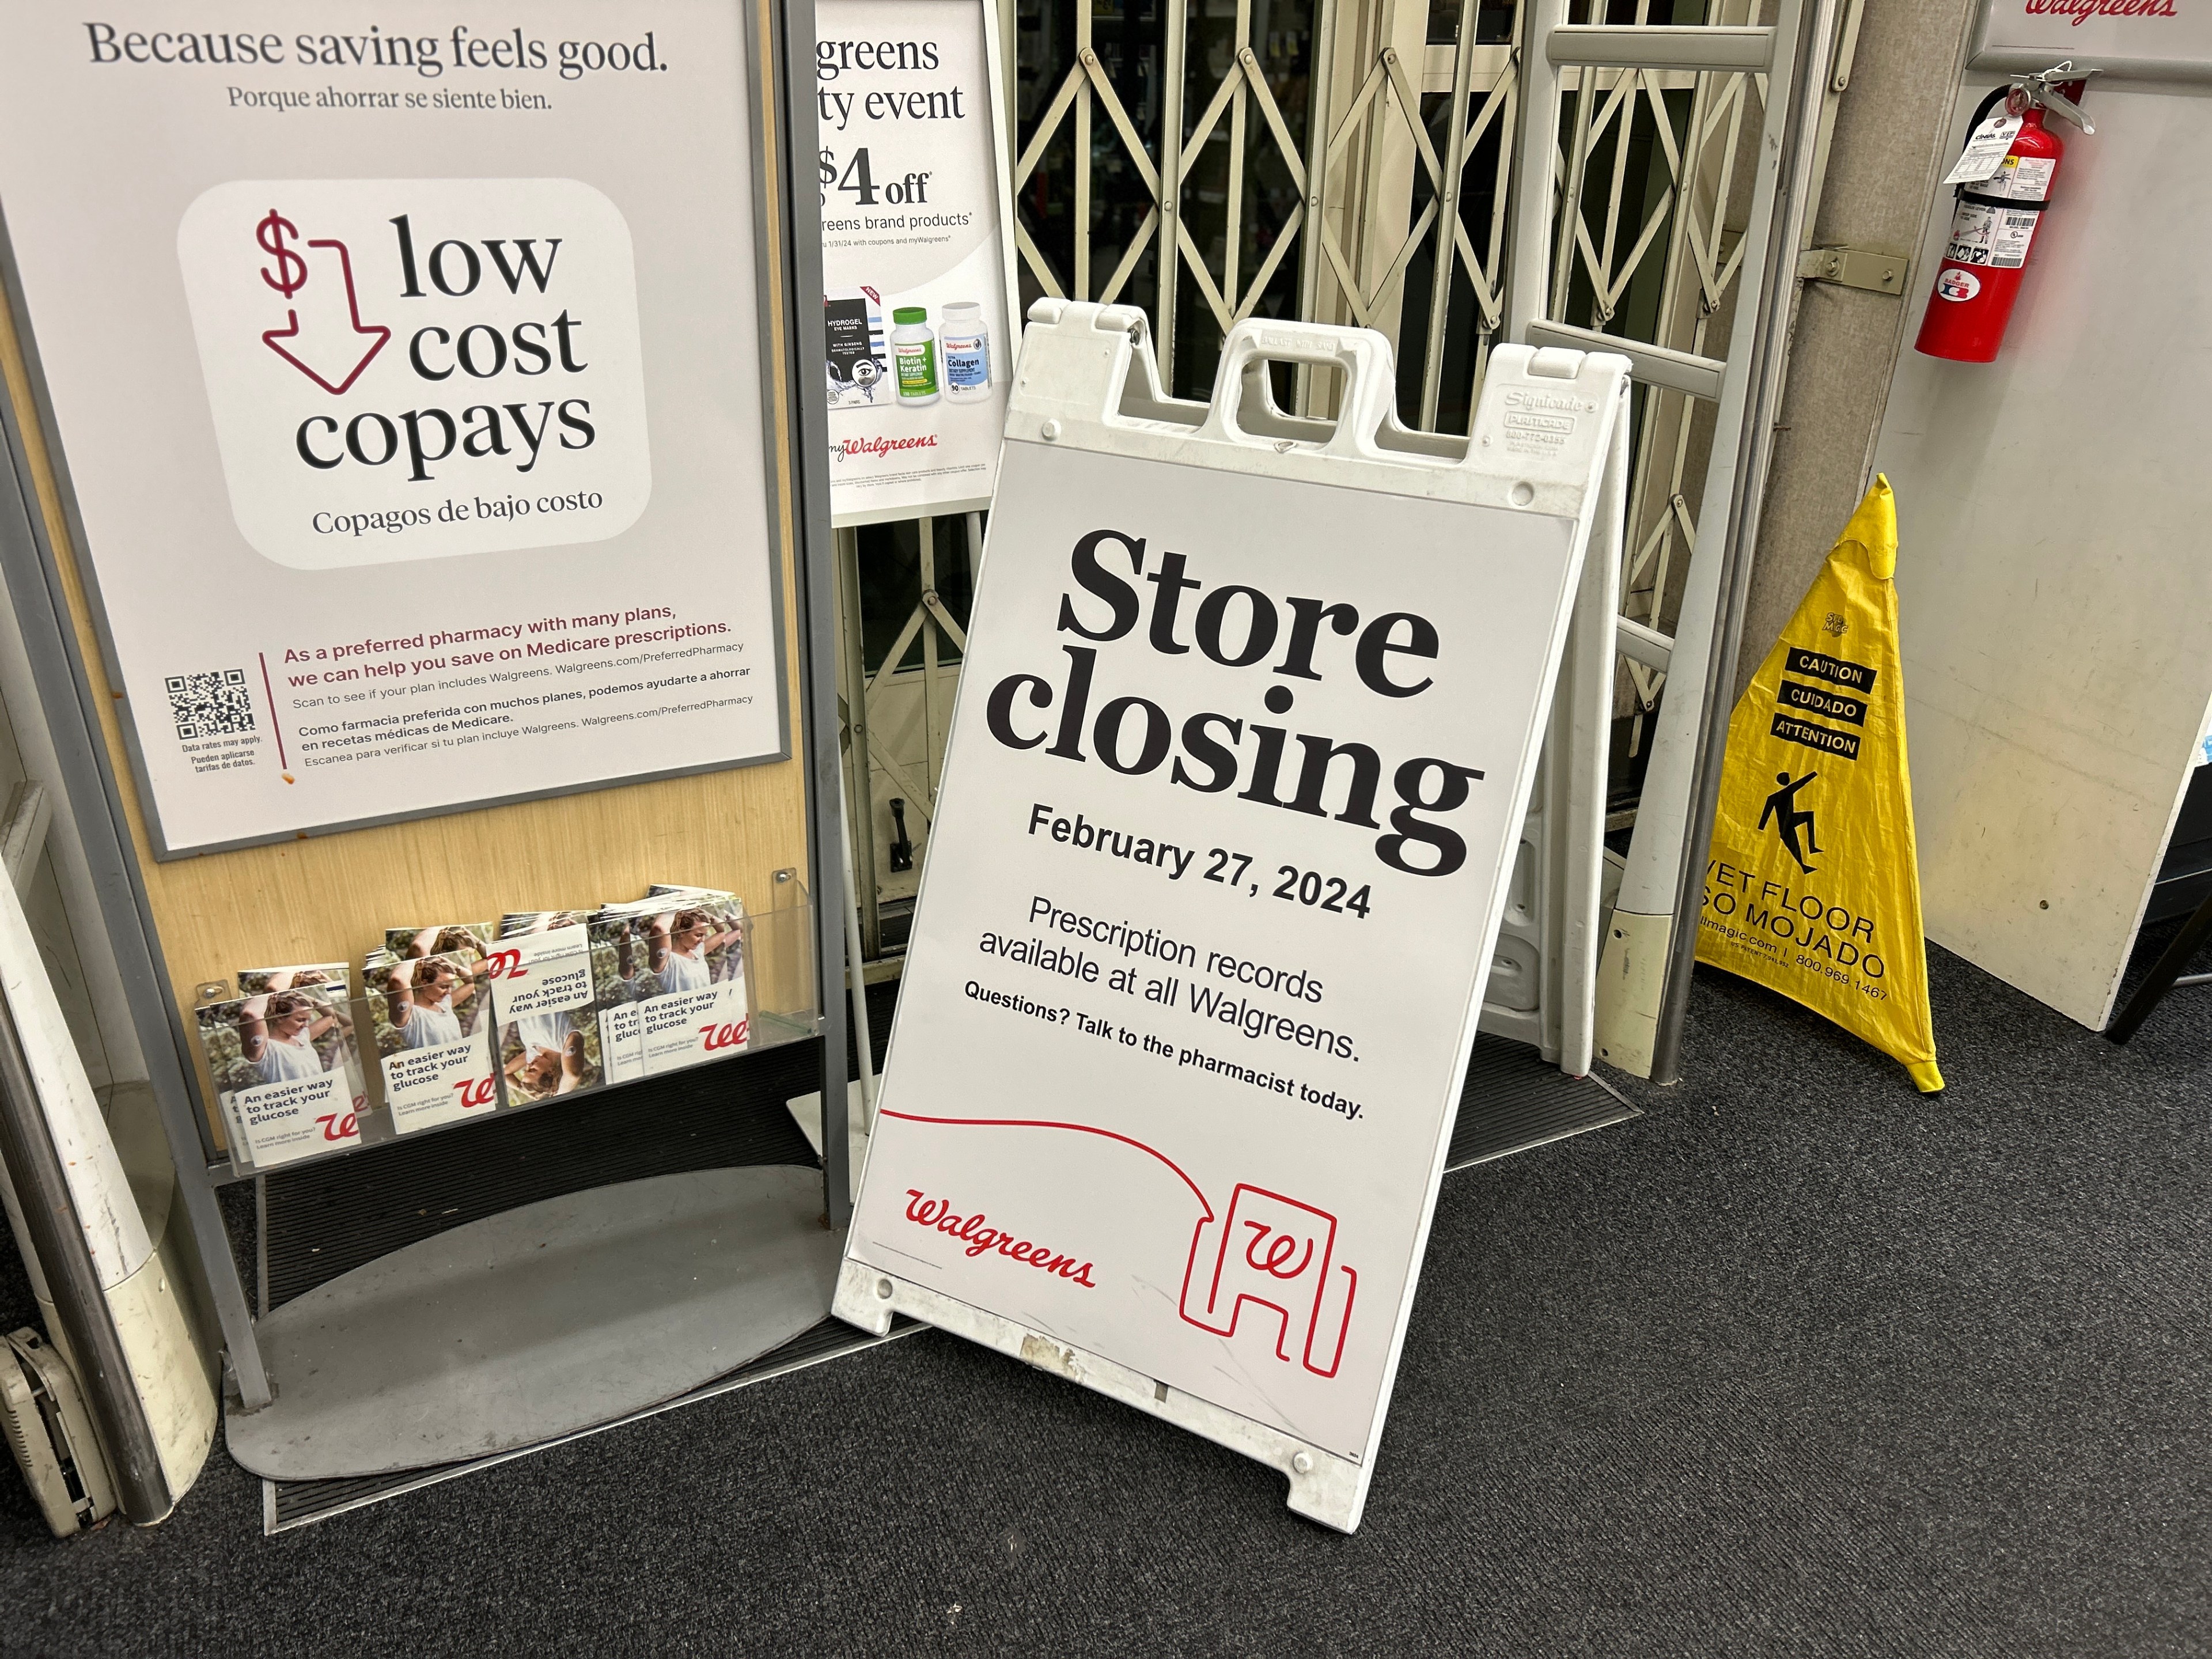 A sandwich board announces the impending closure of a Walgreens.